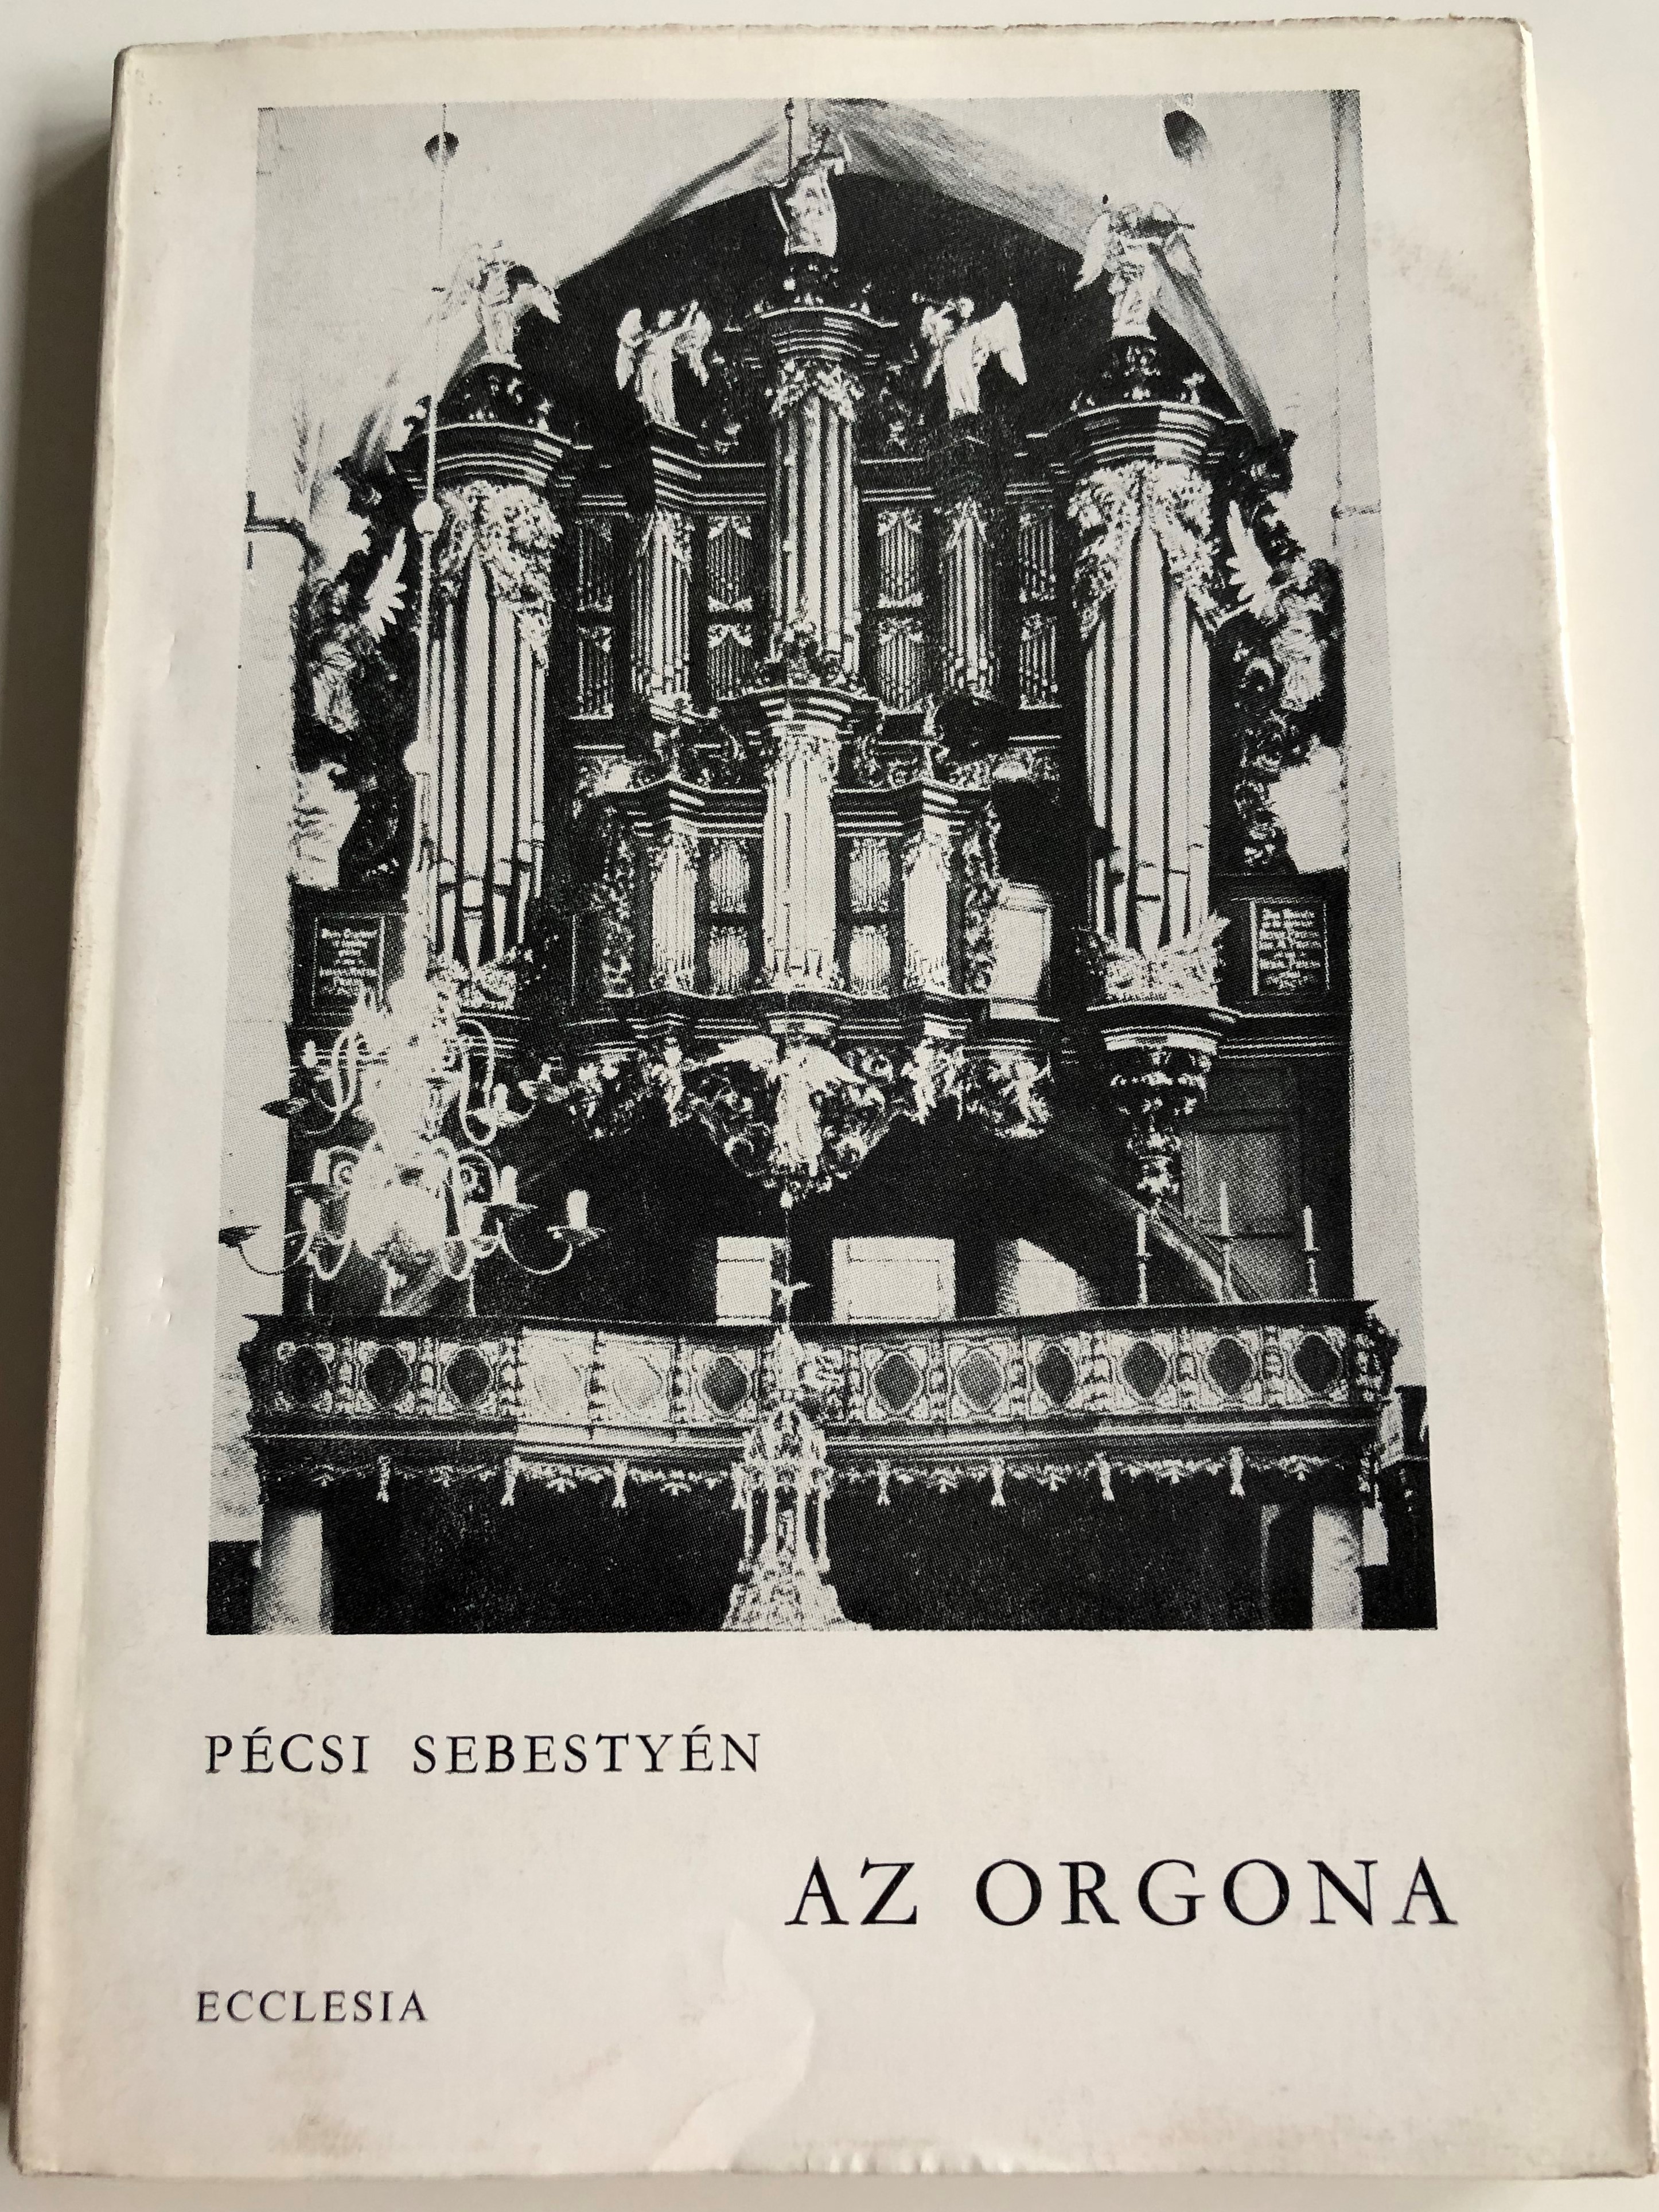 az-orgona-by-p-csi-sebesty-n-the-organ-principles-of-working-and-playing-the-instrument-ecclesia-1975-1-.jpg